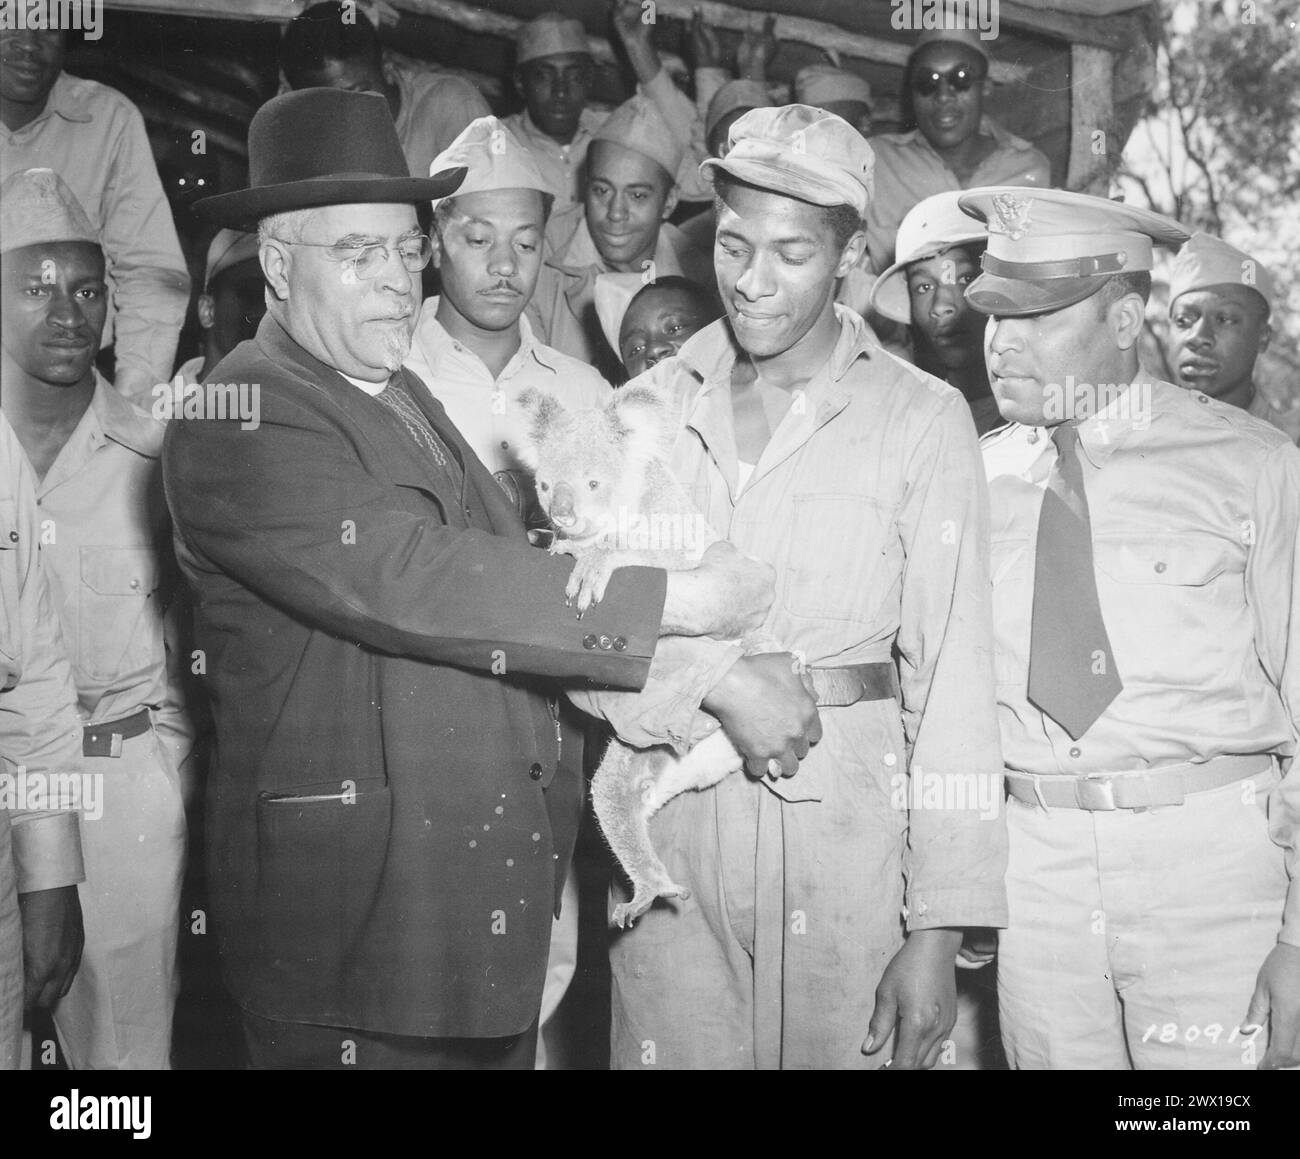 Bishop John Andrew Gregg, Leader of [the] African Methodist Church in North Central United States and Envoy of President Roosevelt, fondles a pet koala bear adopted by Pfc. Sammy Hurt... Around the Bishop are members of the [630th] Ordnance Company ca. 1943 Stock Photo